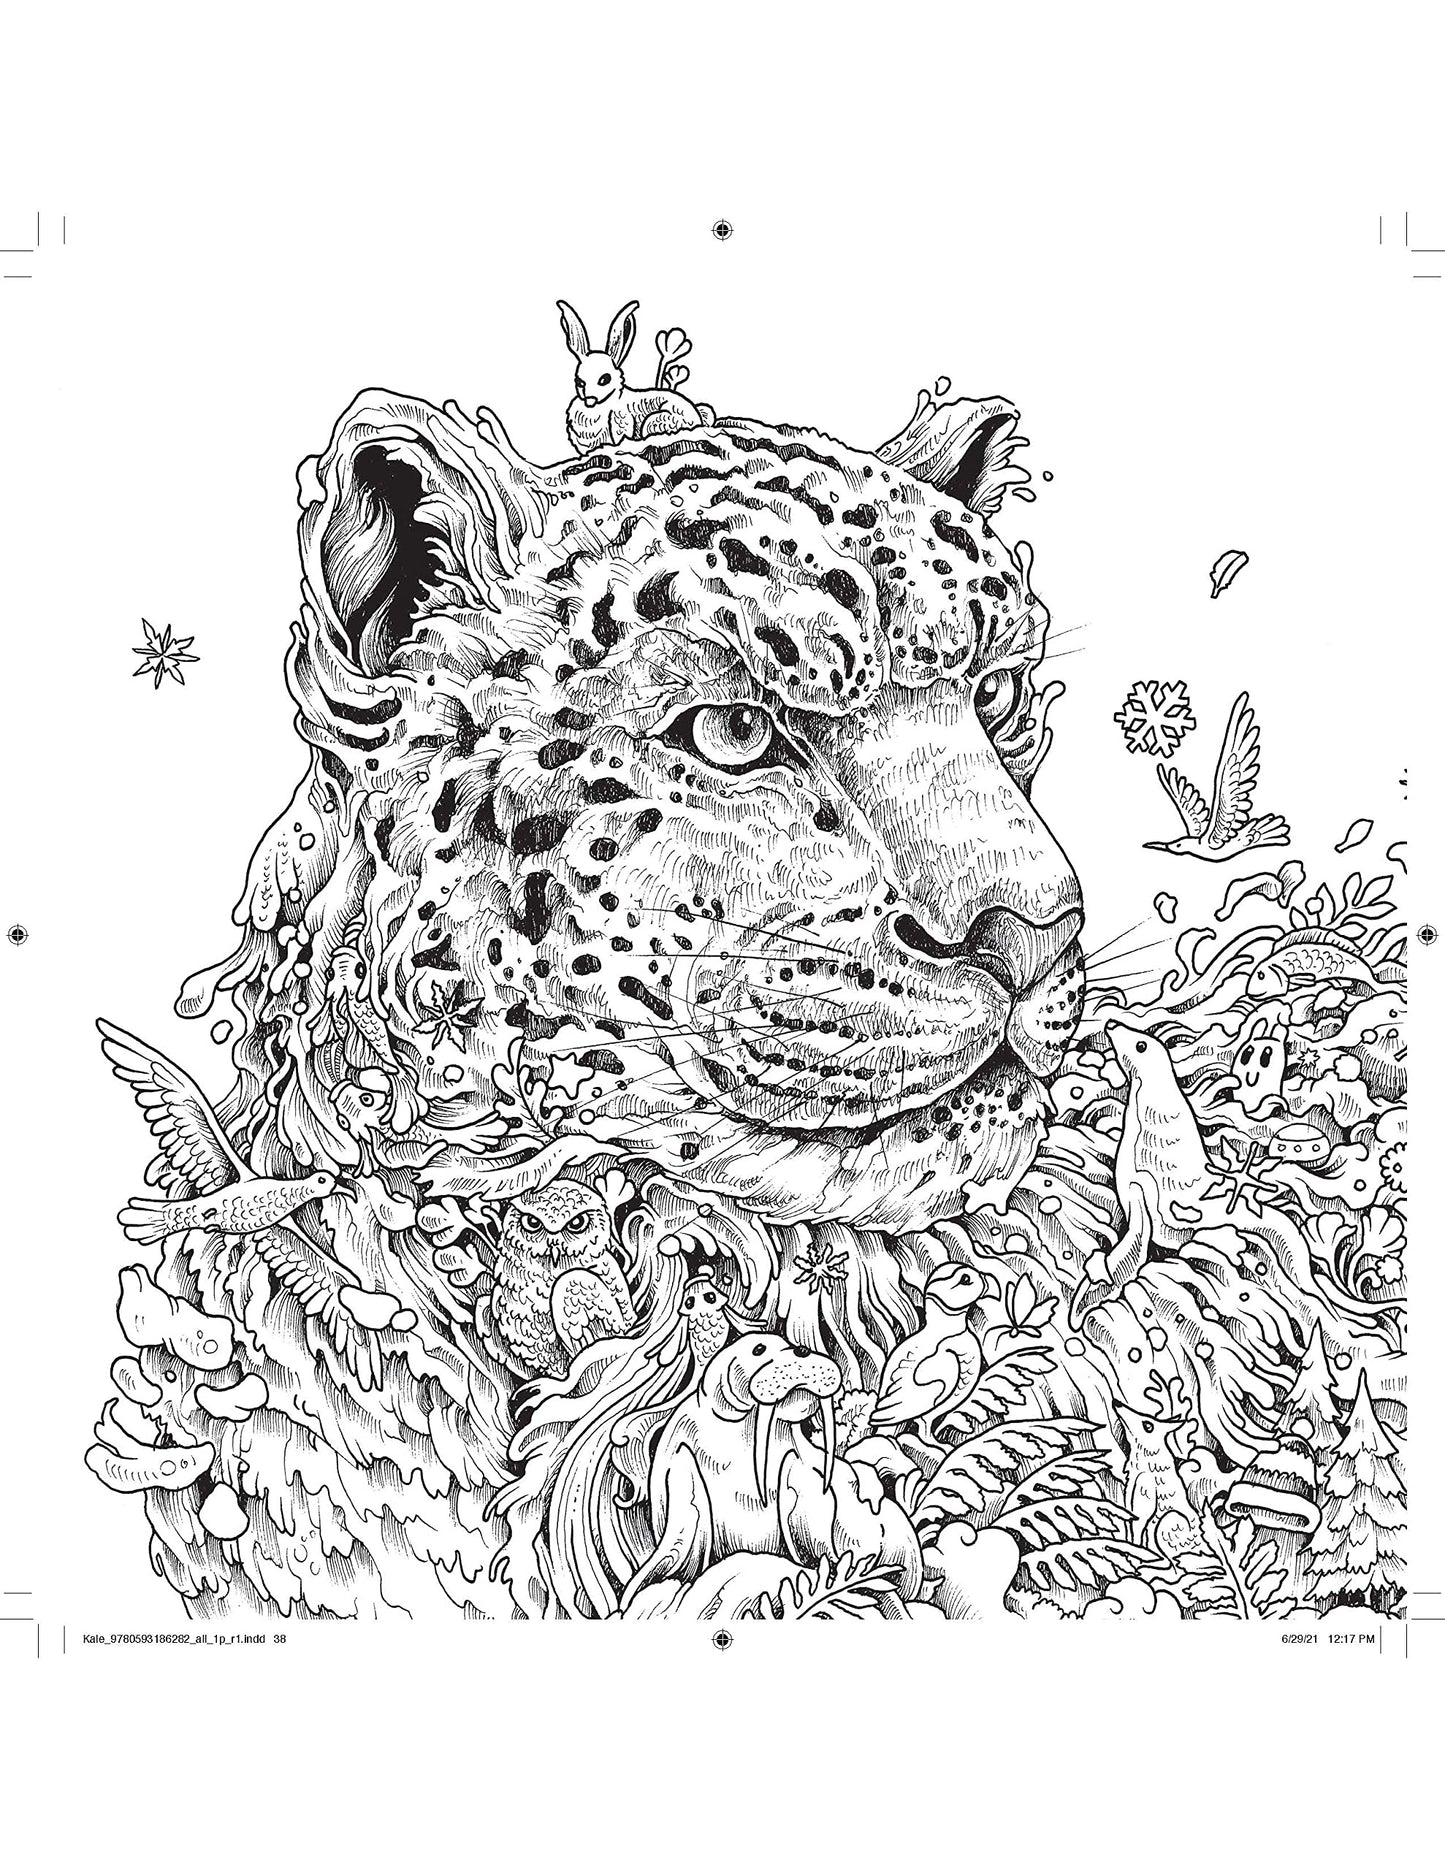 Alien Worlds - Kerby Rosanes : r/Coloring